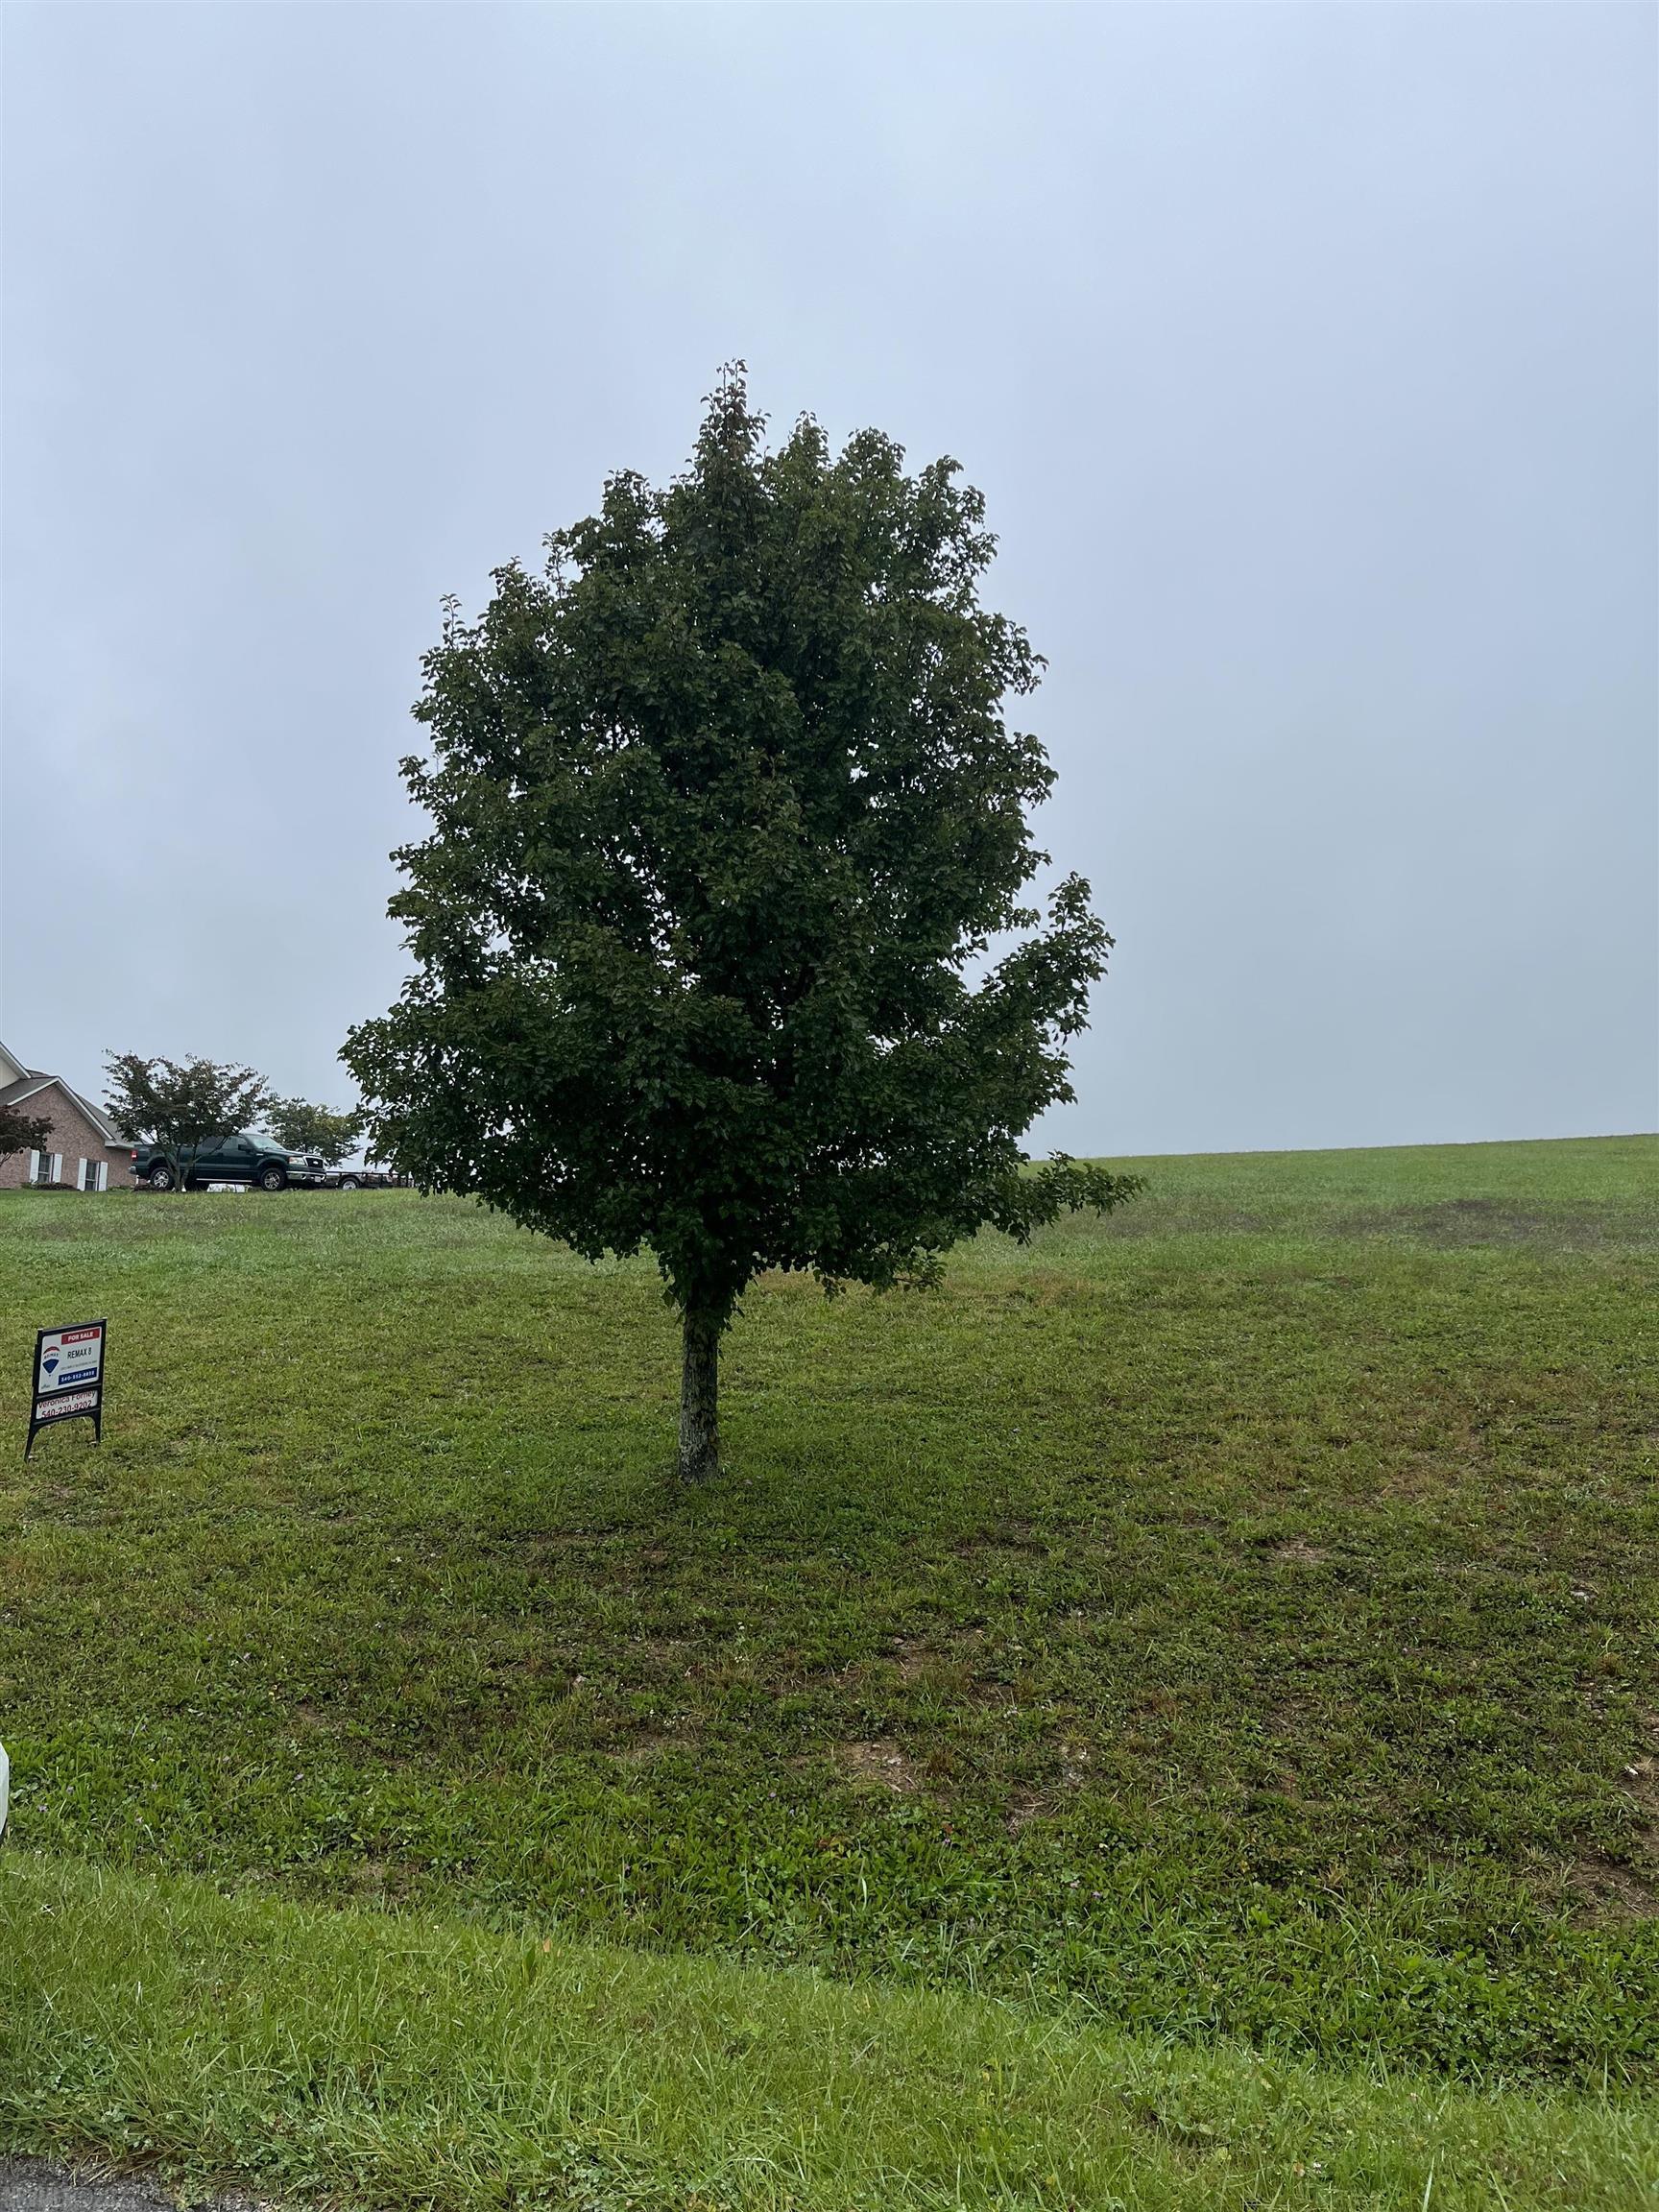 This is a beautiful building site for your dream home with a view of the larger pond and green space.  Lovely custom homes fill this quiet pet friendly neighborhood.  Ten minutes to the Carilion hospital and an easy drive to either Radford University or Virginia Tech University.